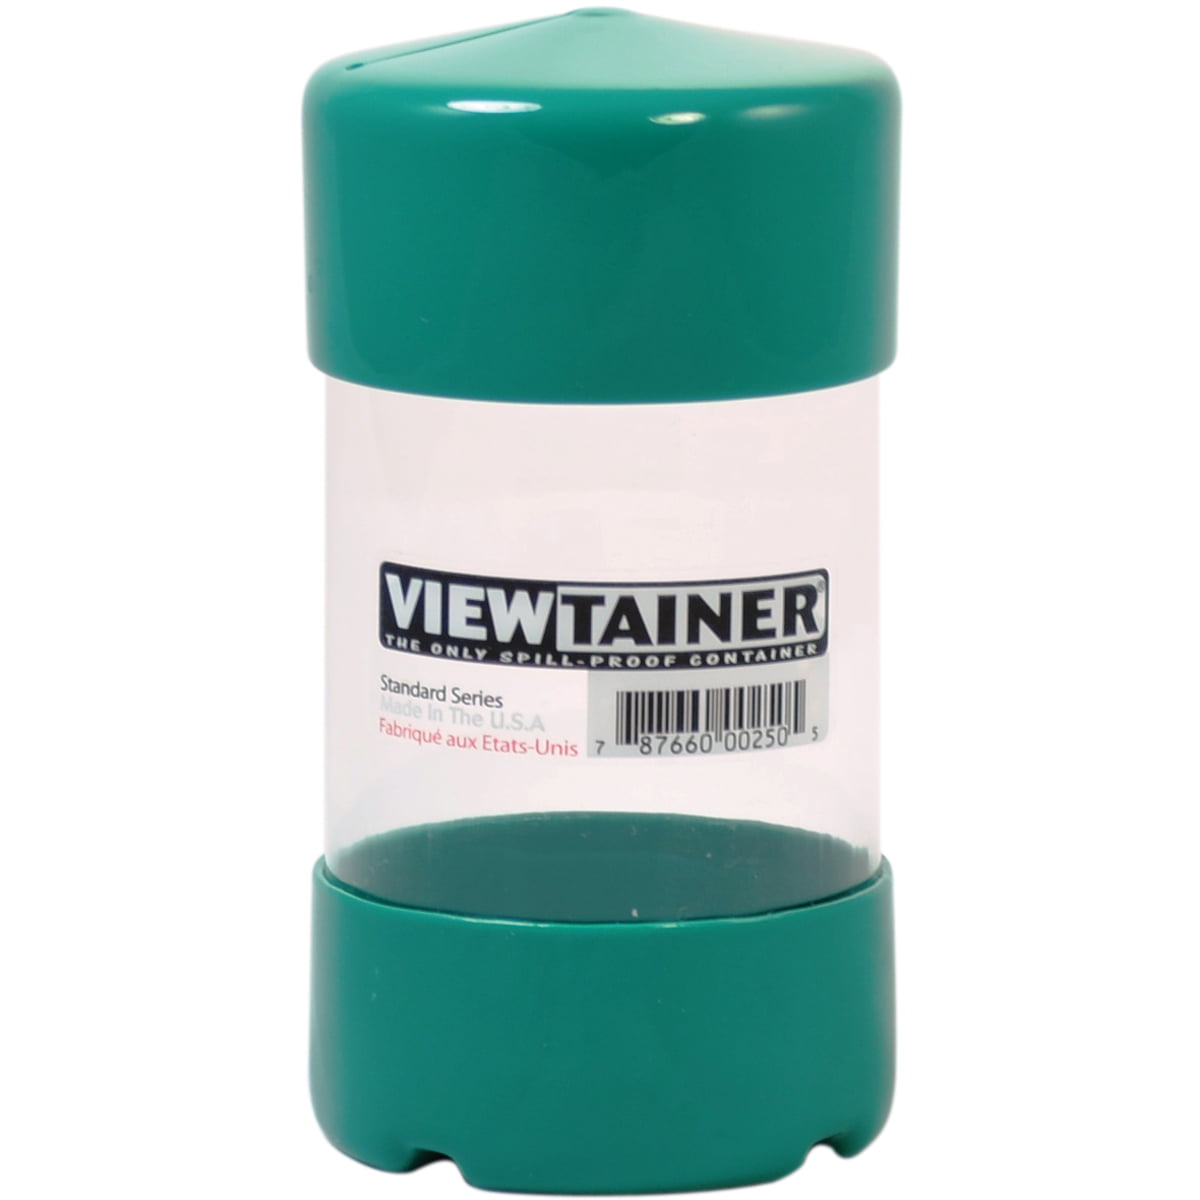 Viewtainer Bulk Buy 6-Pack Storage Container 2 inch x 6 inch Green CC26-2